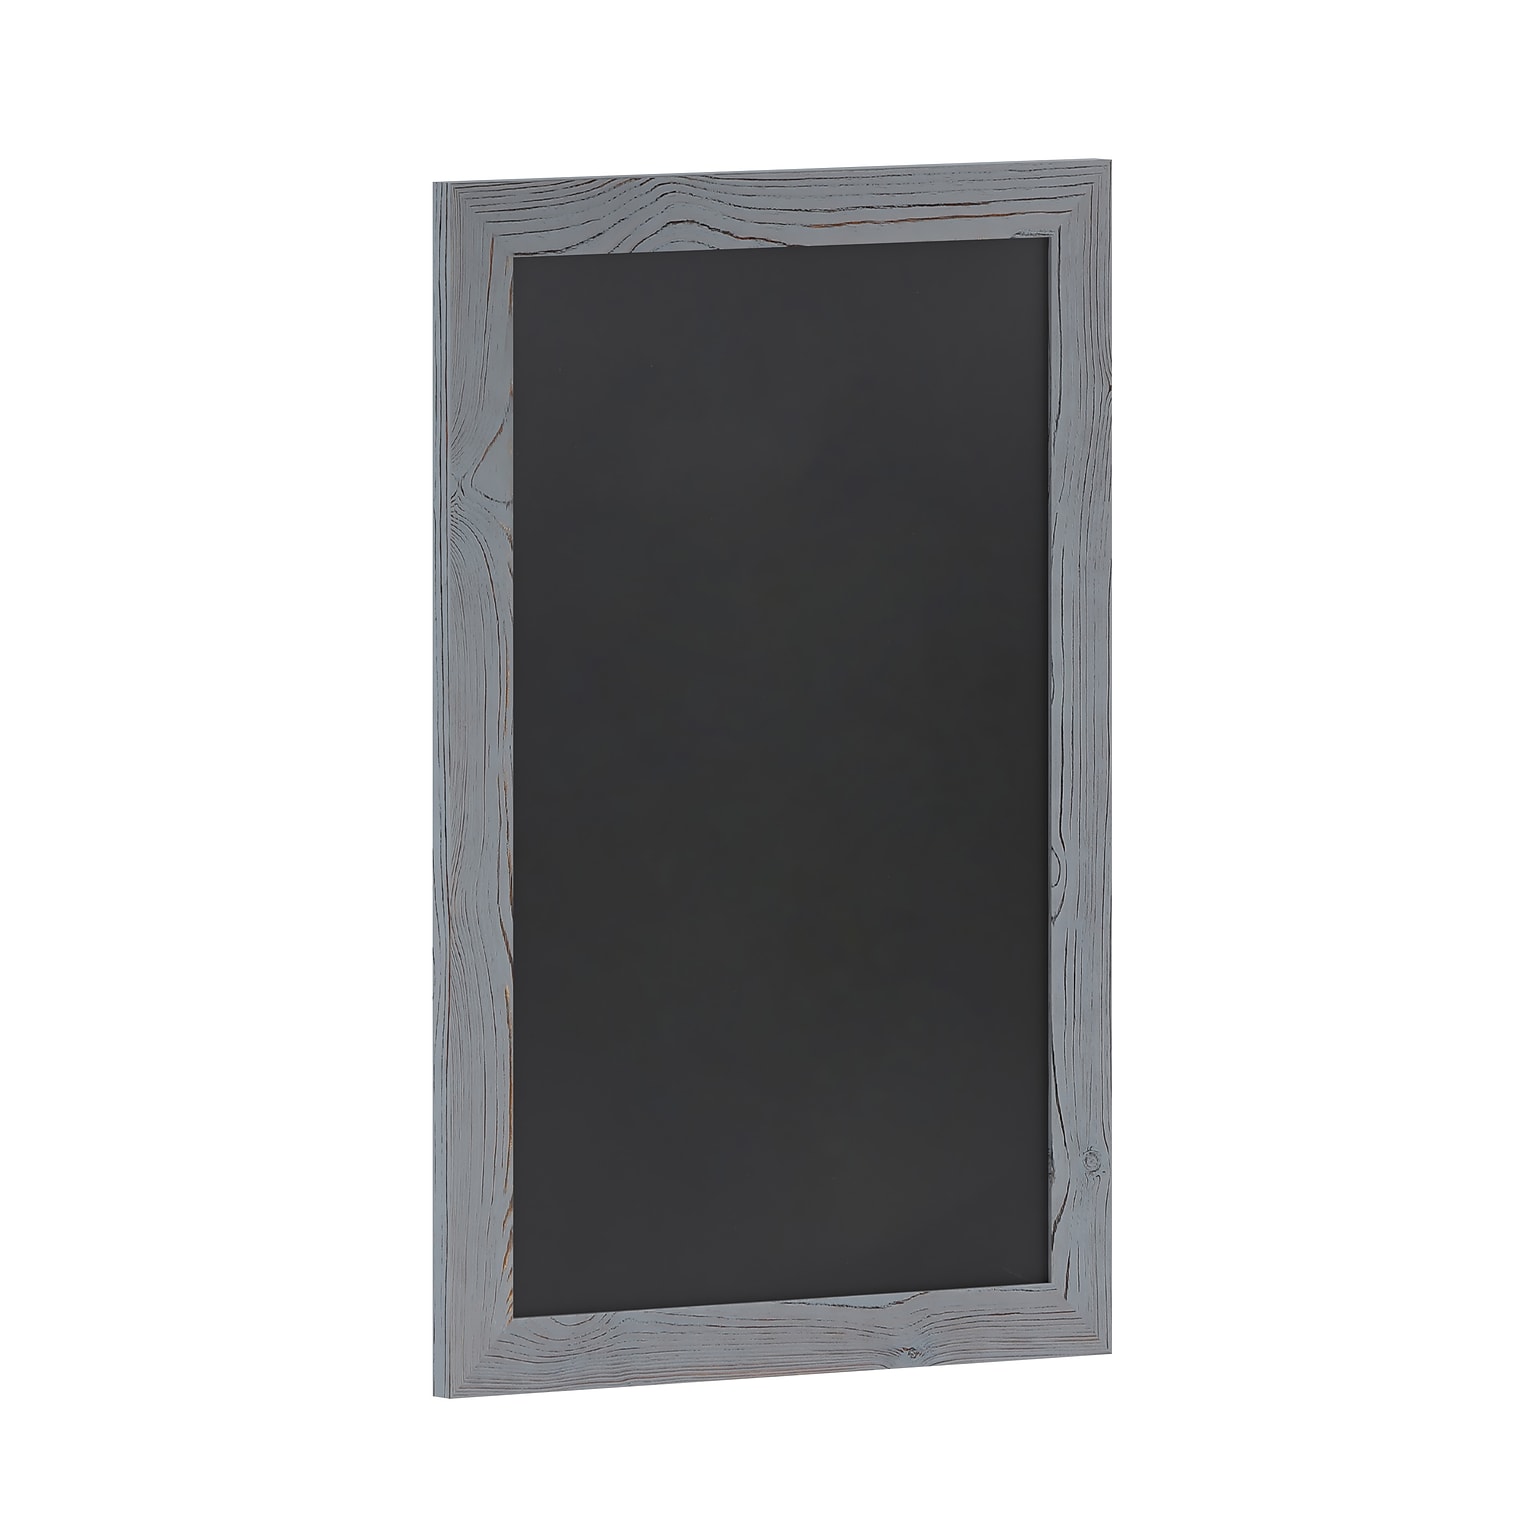 Flash Furniture Canterbury Wall Mount Magnetic Chalkboard Sign, Rustic Gray, 20 x 30 (HGWAGDI552315)